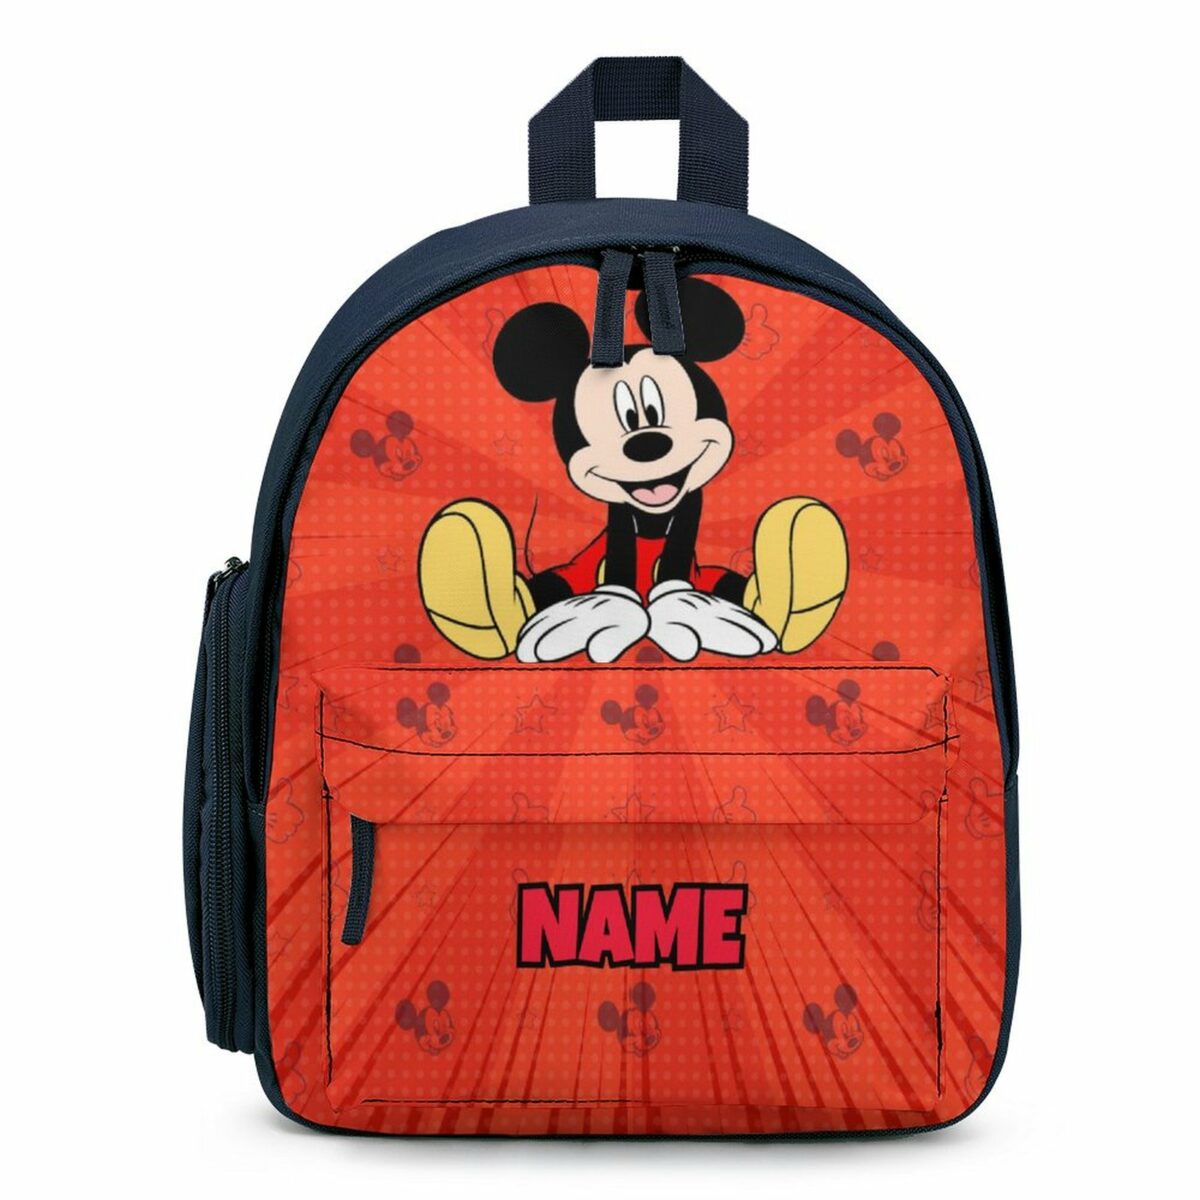 Personalized Mickey Mouse Blue and Orange Children’s School Bag – Toddler’s Backpack Cool Kiddo 10